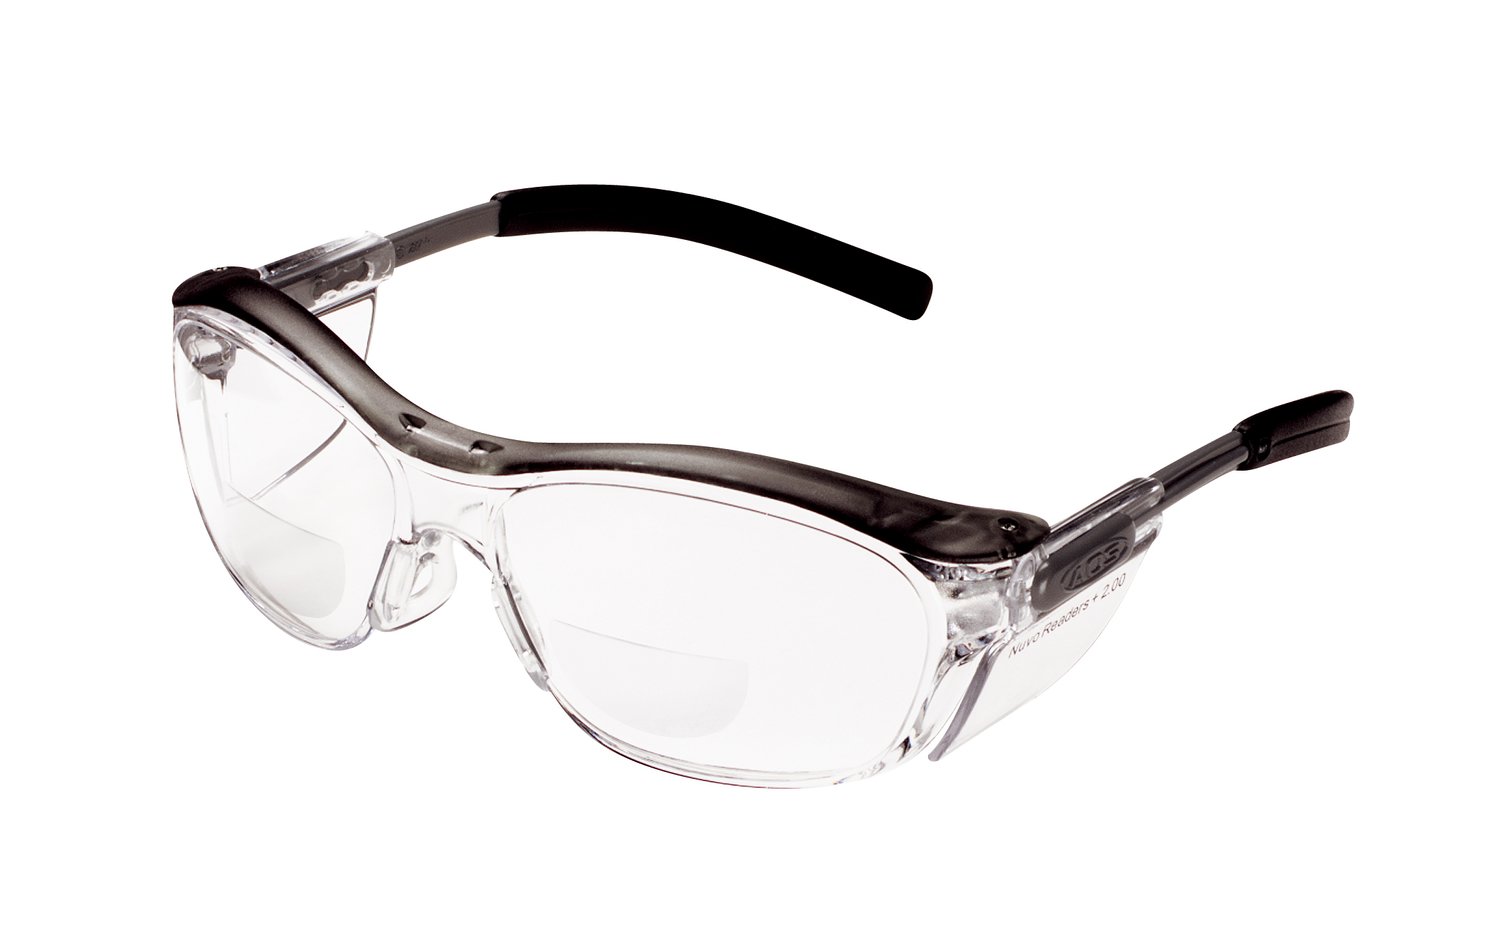 7000052798 - 3M Nuvo Protective Eyewear 11435-00000-20 Clear Lens, Grey Frame, +2.0
Diopter 20 ea/Case